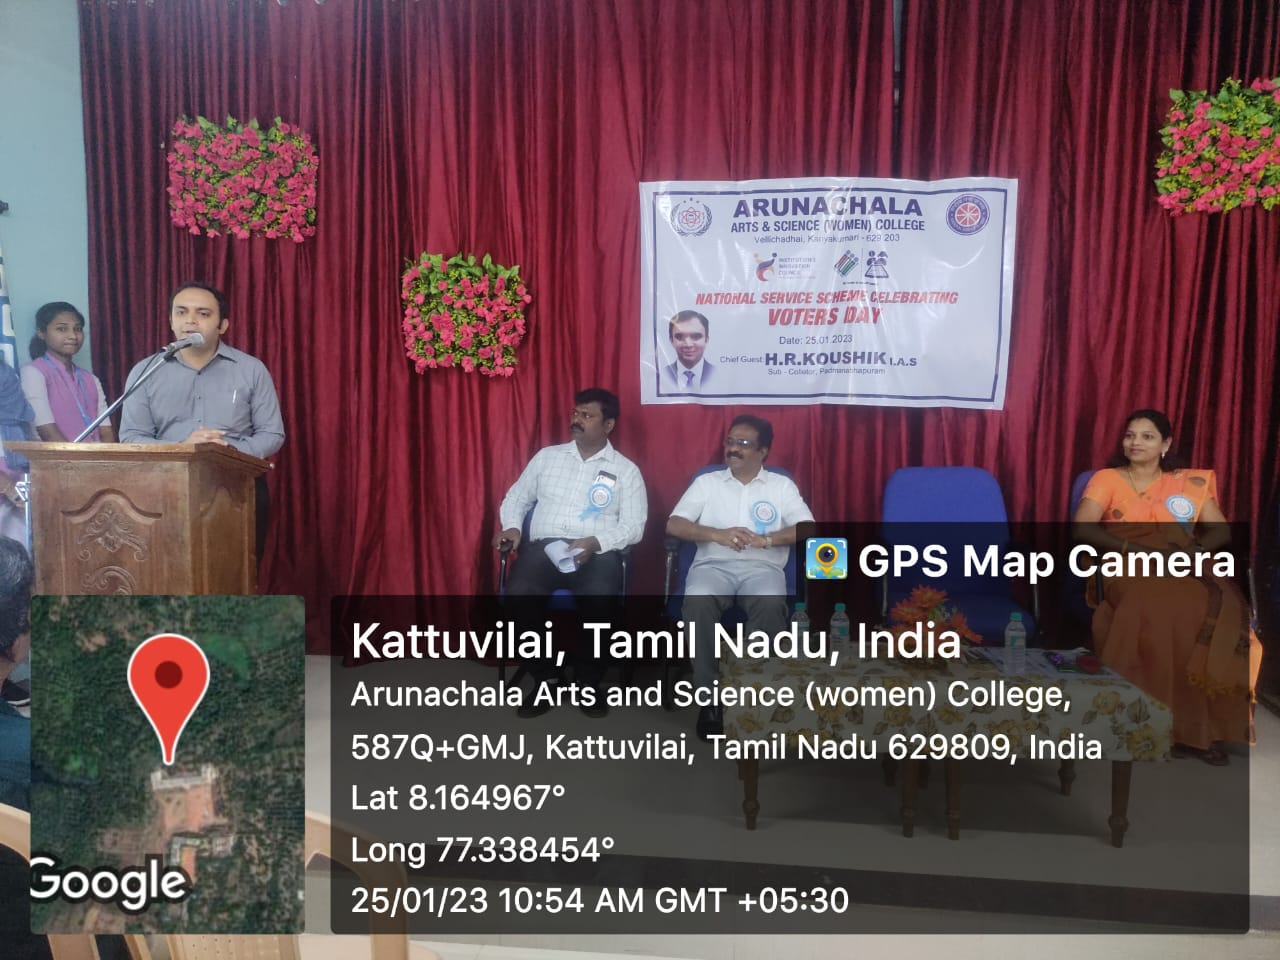 Voters day was celebrated and H. R. KOUSHIK I.A.S (Sub collector, Pathmanathapuram was the chief guest.